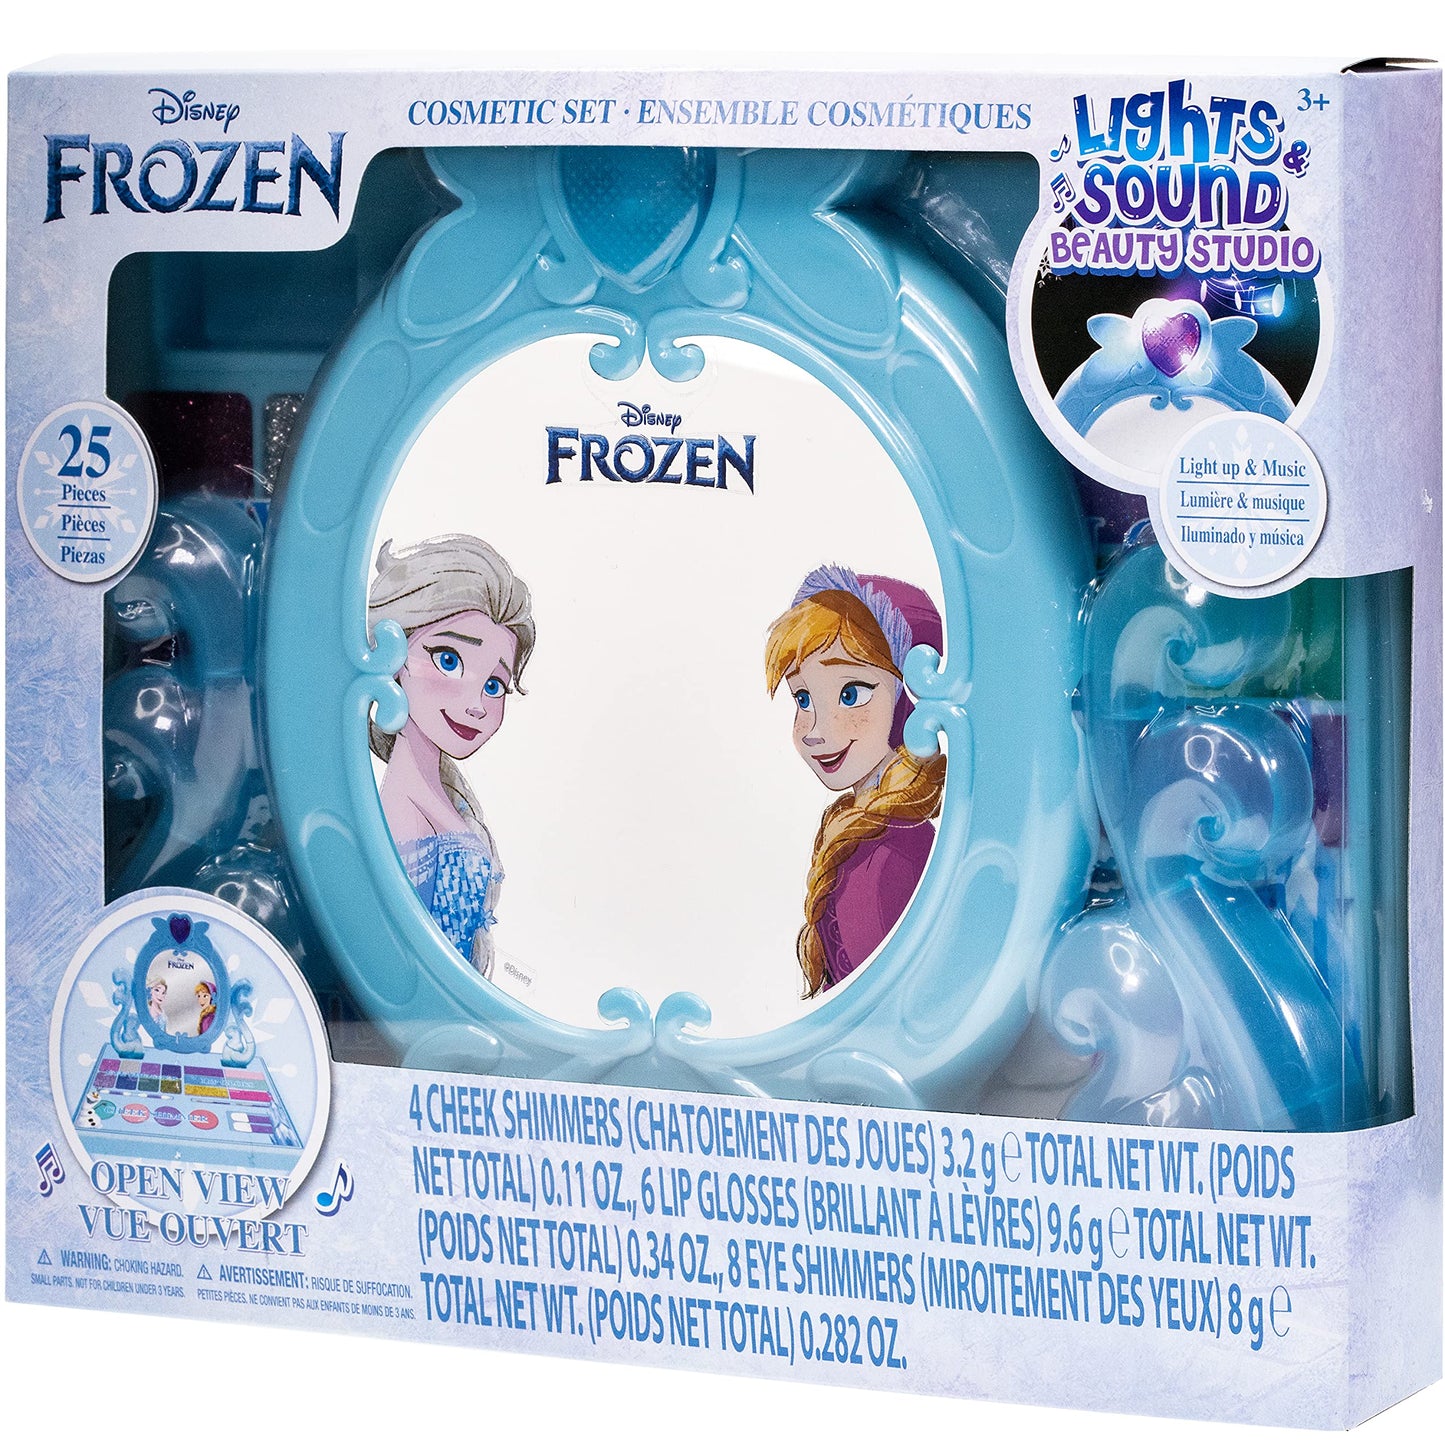 Disney Frozen - Townley Girl Cosmetic Vanity Compact Makeup Set with Mirror & Built-in Music Includes Lip Gloss, Shimmer & Brushes for Kids Girls, Ages 3+ perfect for Parties, Sleepovers and Makeovers